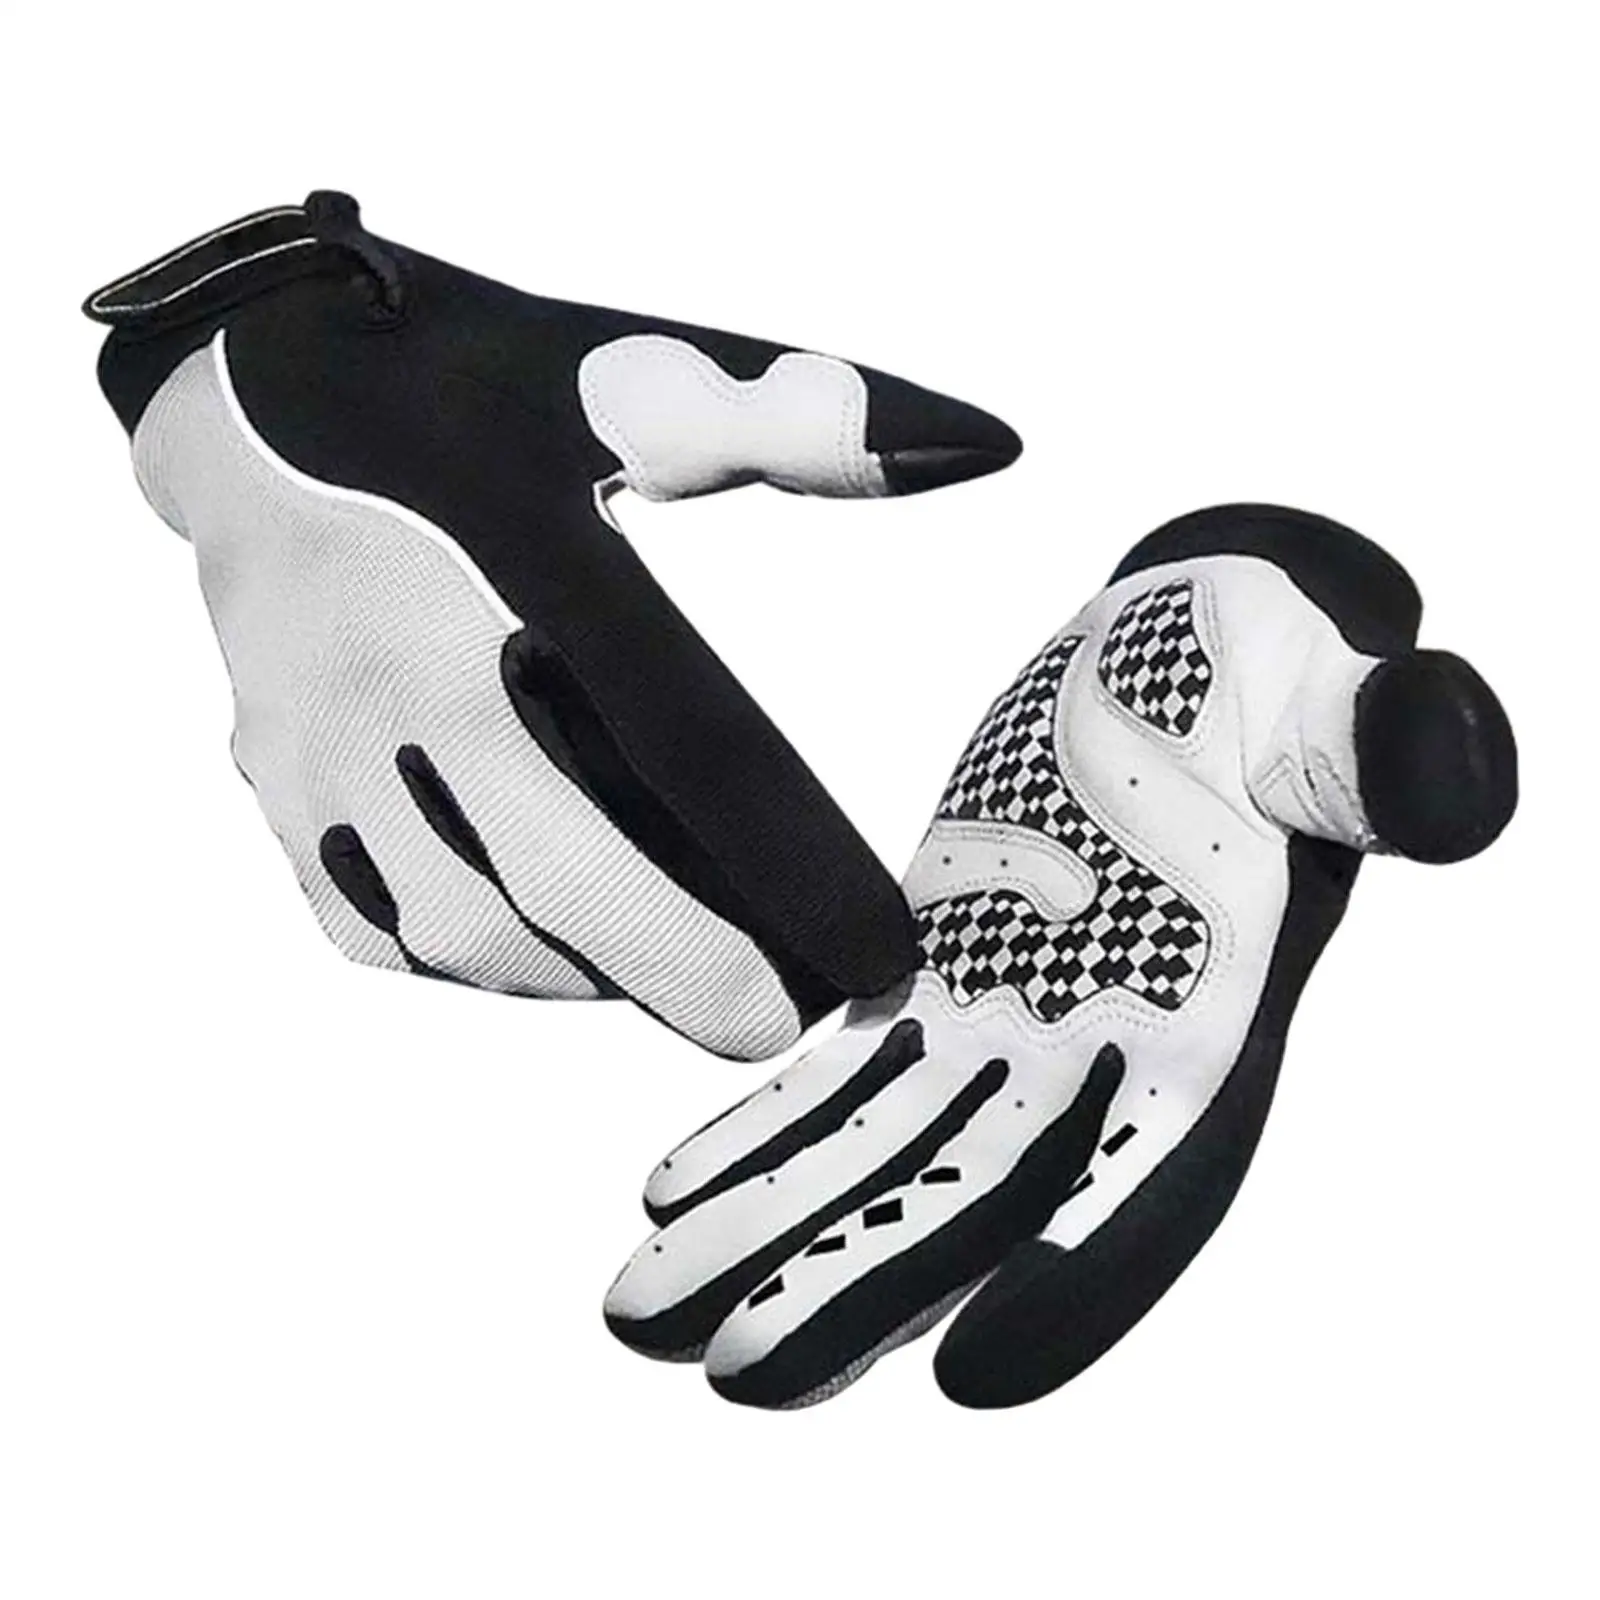 

Winter Gloves Touchscreen Windproof Cold Weather Gloves Cycling Gloves Snow Gloves for Running Biking Skating Motorcycle Outdoor